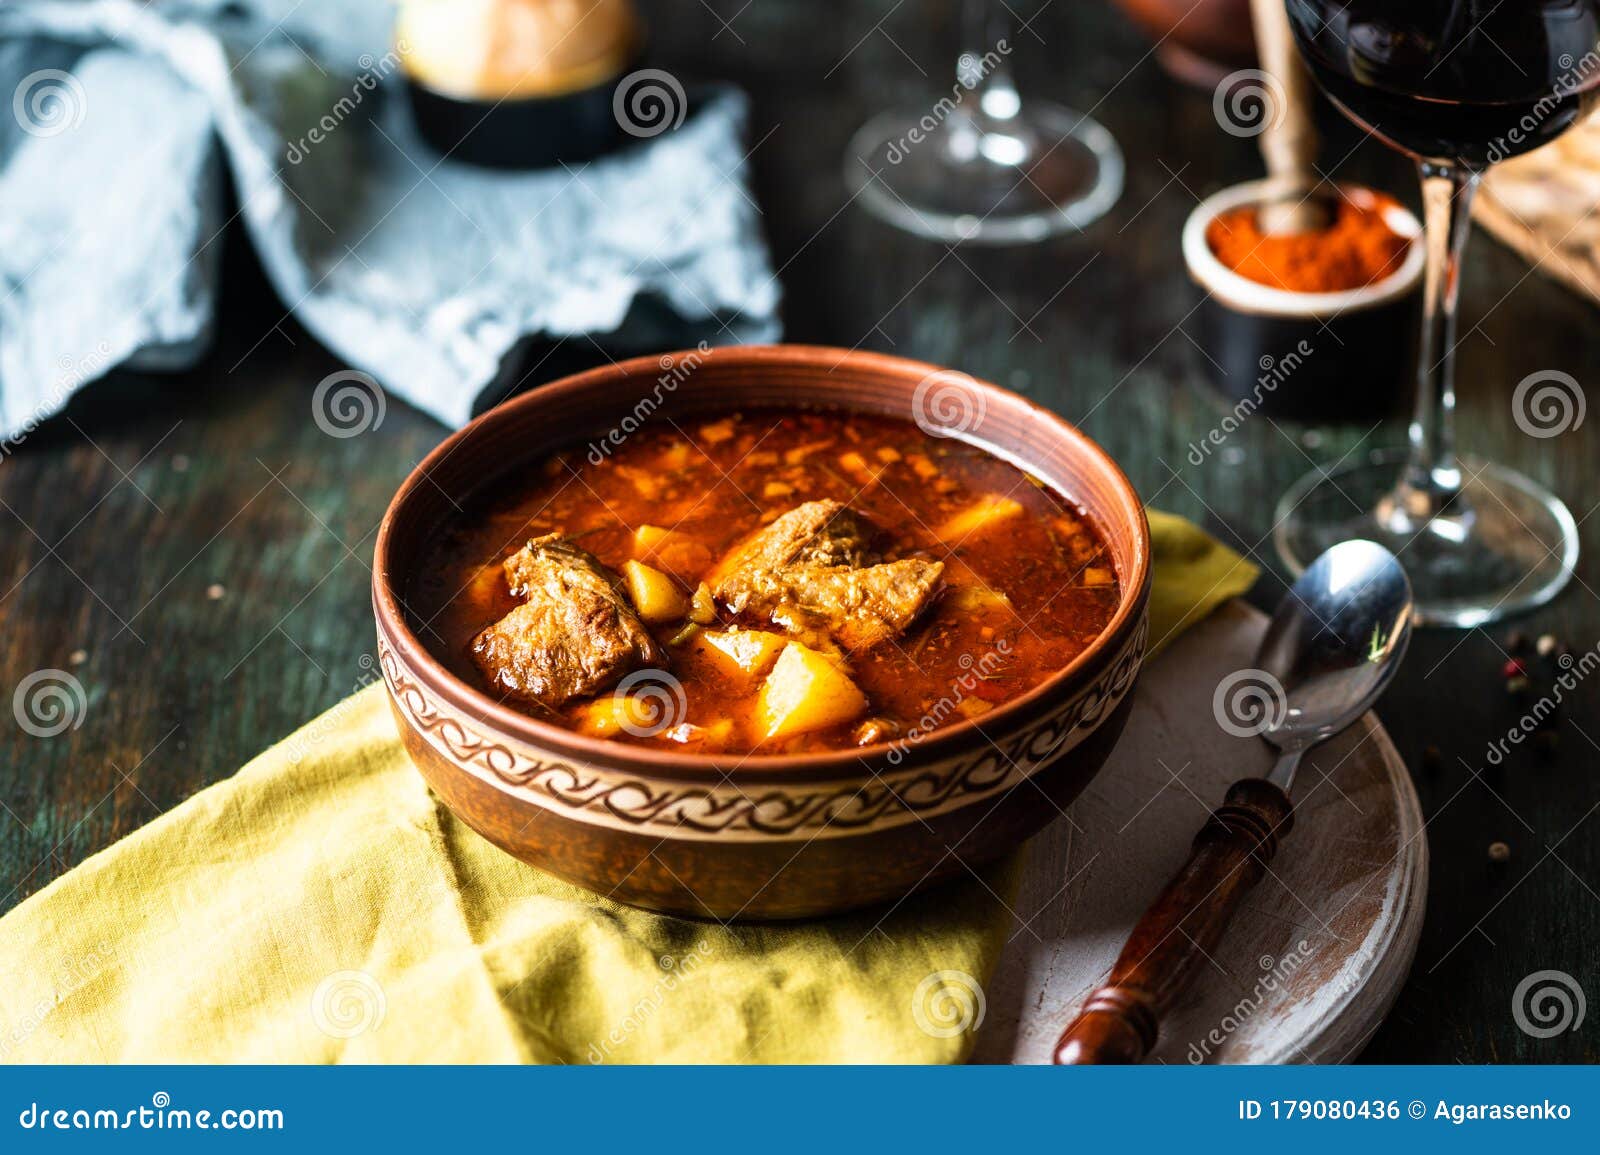 goulash or stew in copper pan with spoon on rustic kitchen table. eintopf, chili con carne. traditional hungarian dish. homemade